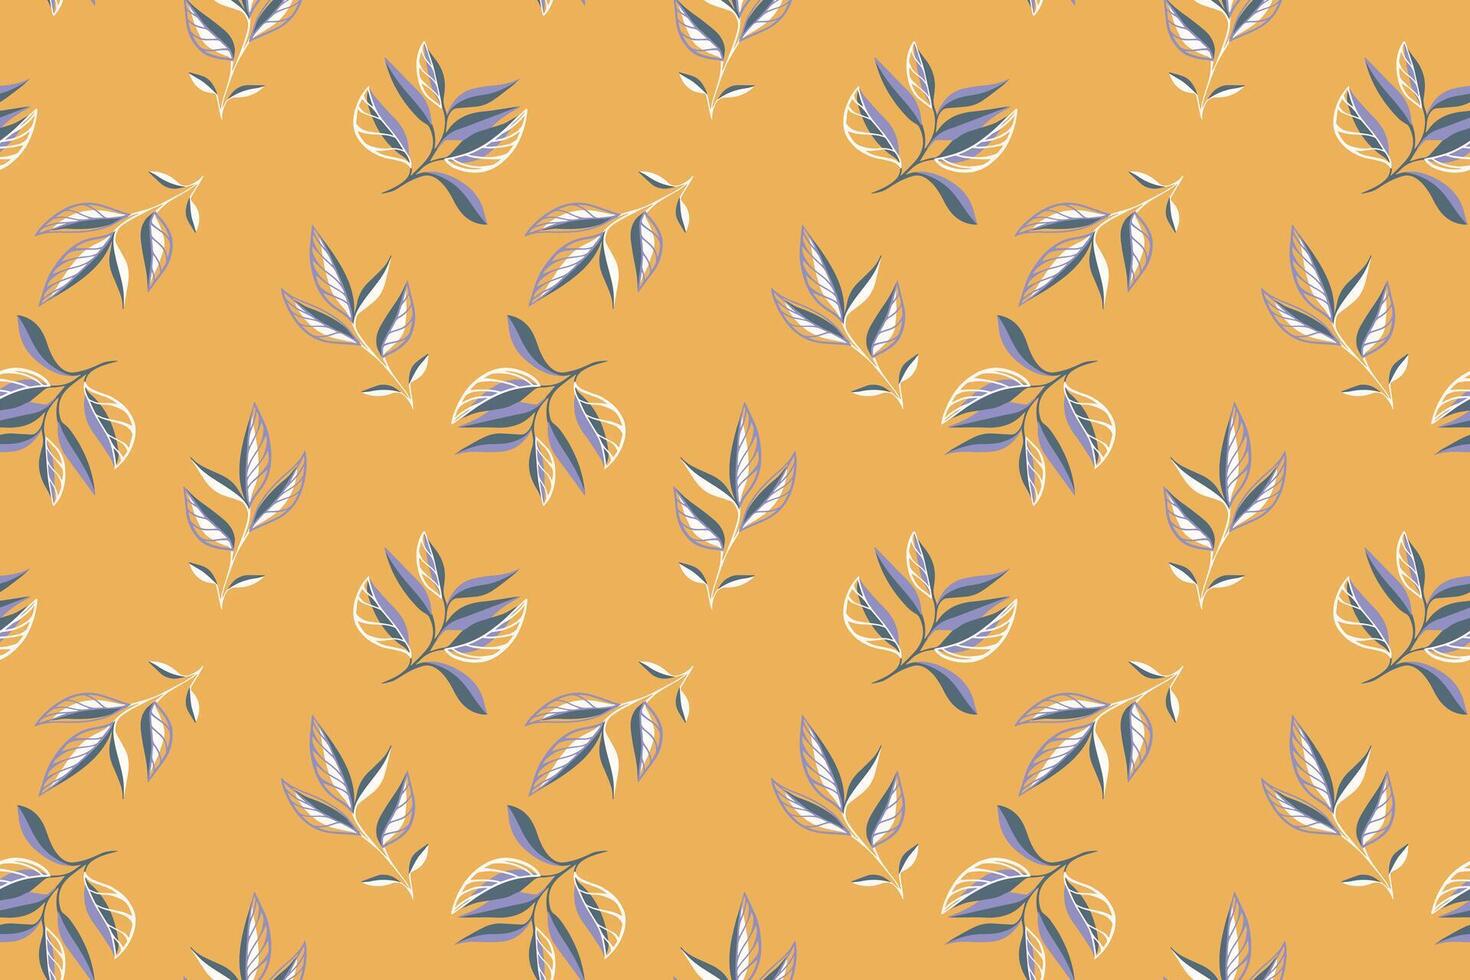 Abstract minimalist branches leaves seamless pattern. Cute creative tiny tropical leafs scattered randomly on a yellow background. Vector hand drawn sketch. Collage for designs, printing, patterned